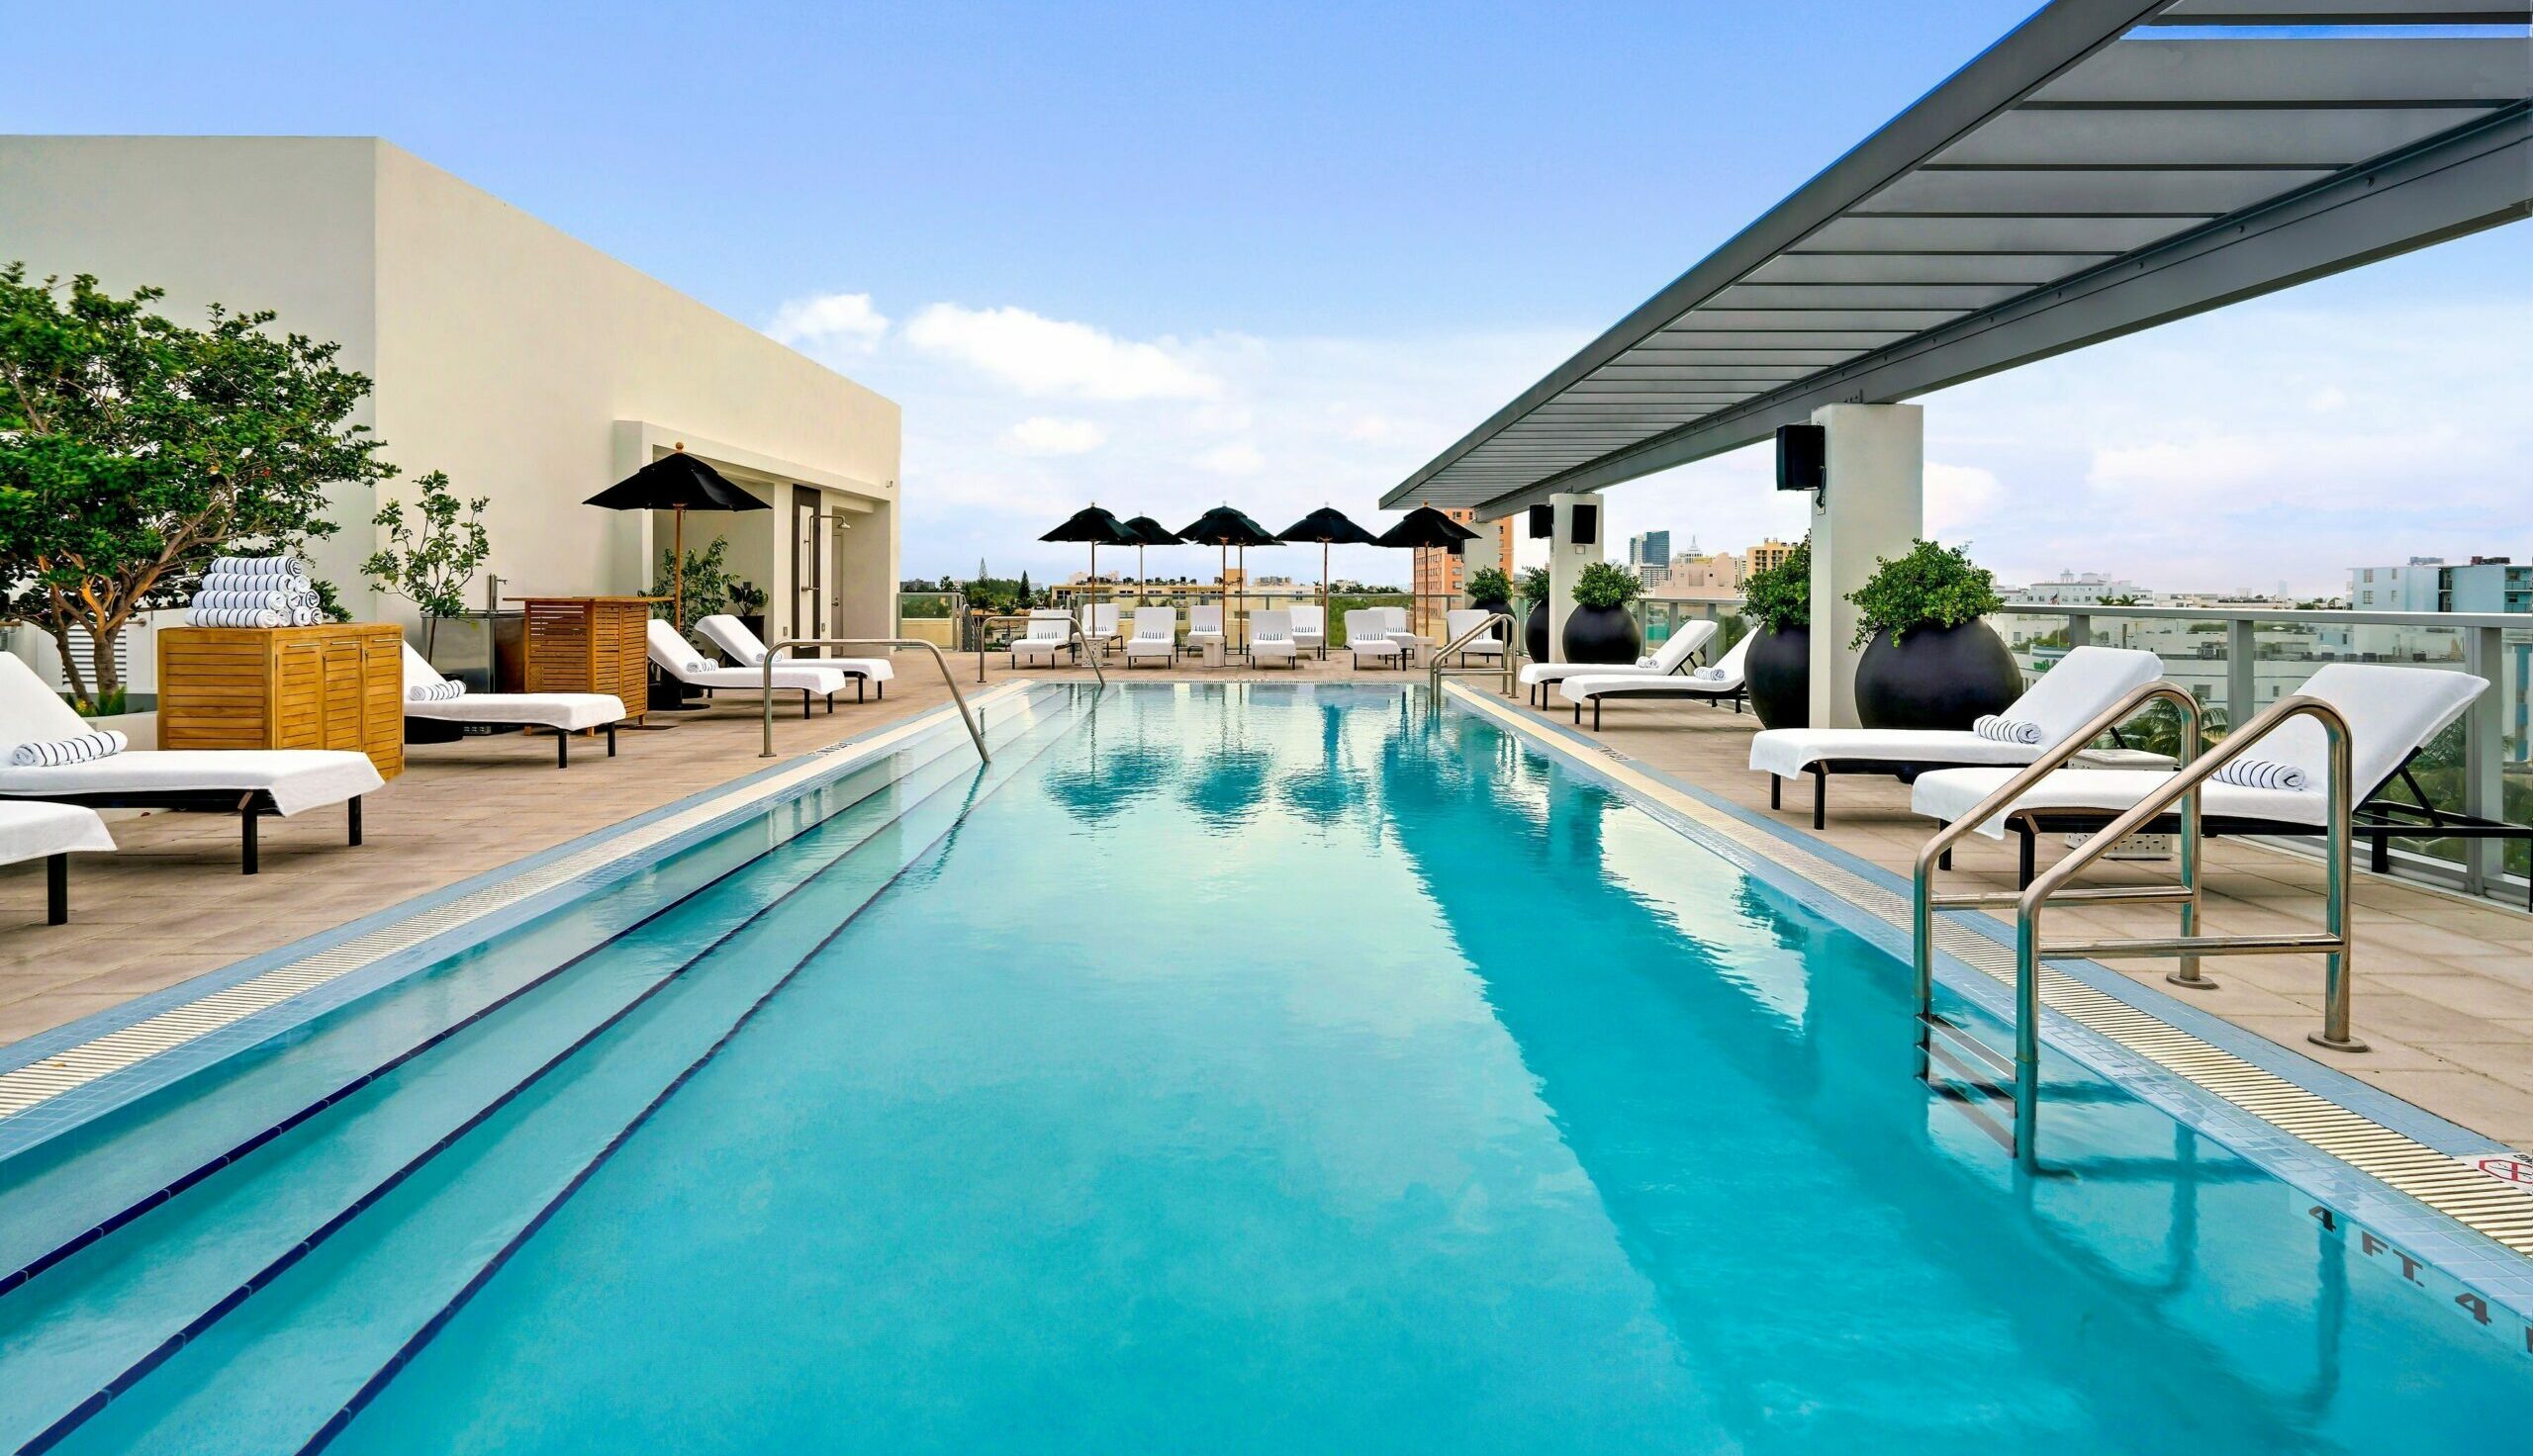 Offer from Kimpton Miami hotels